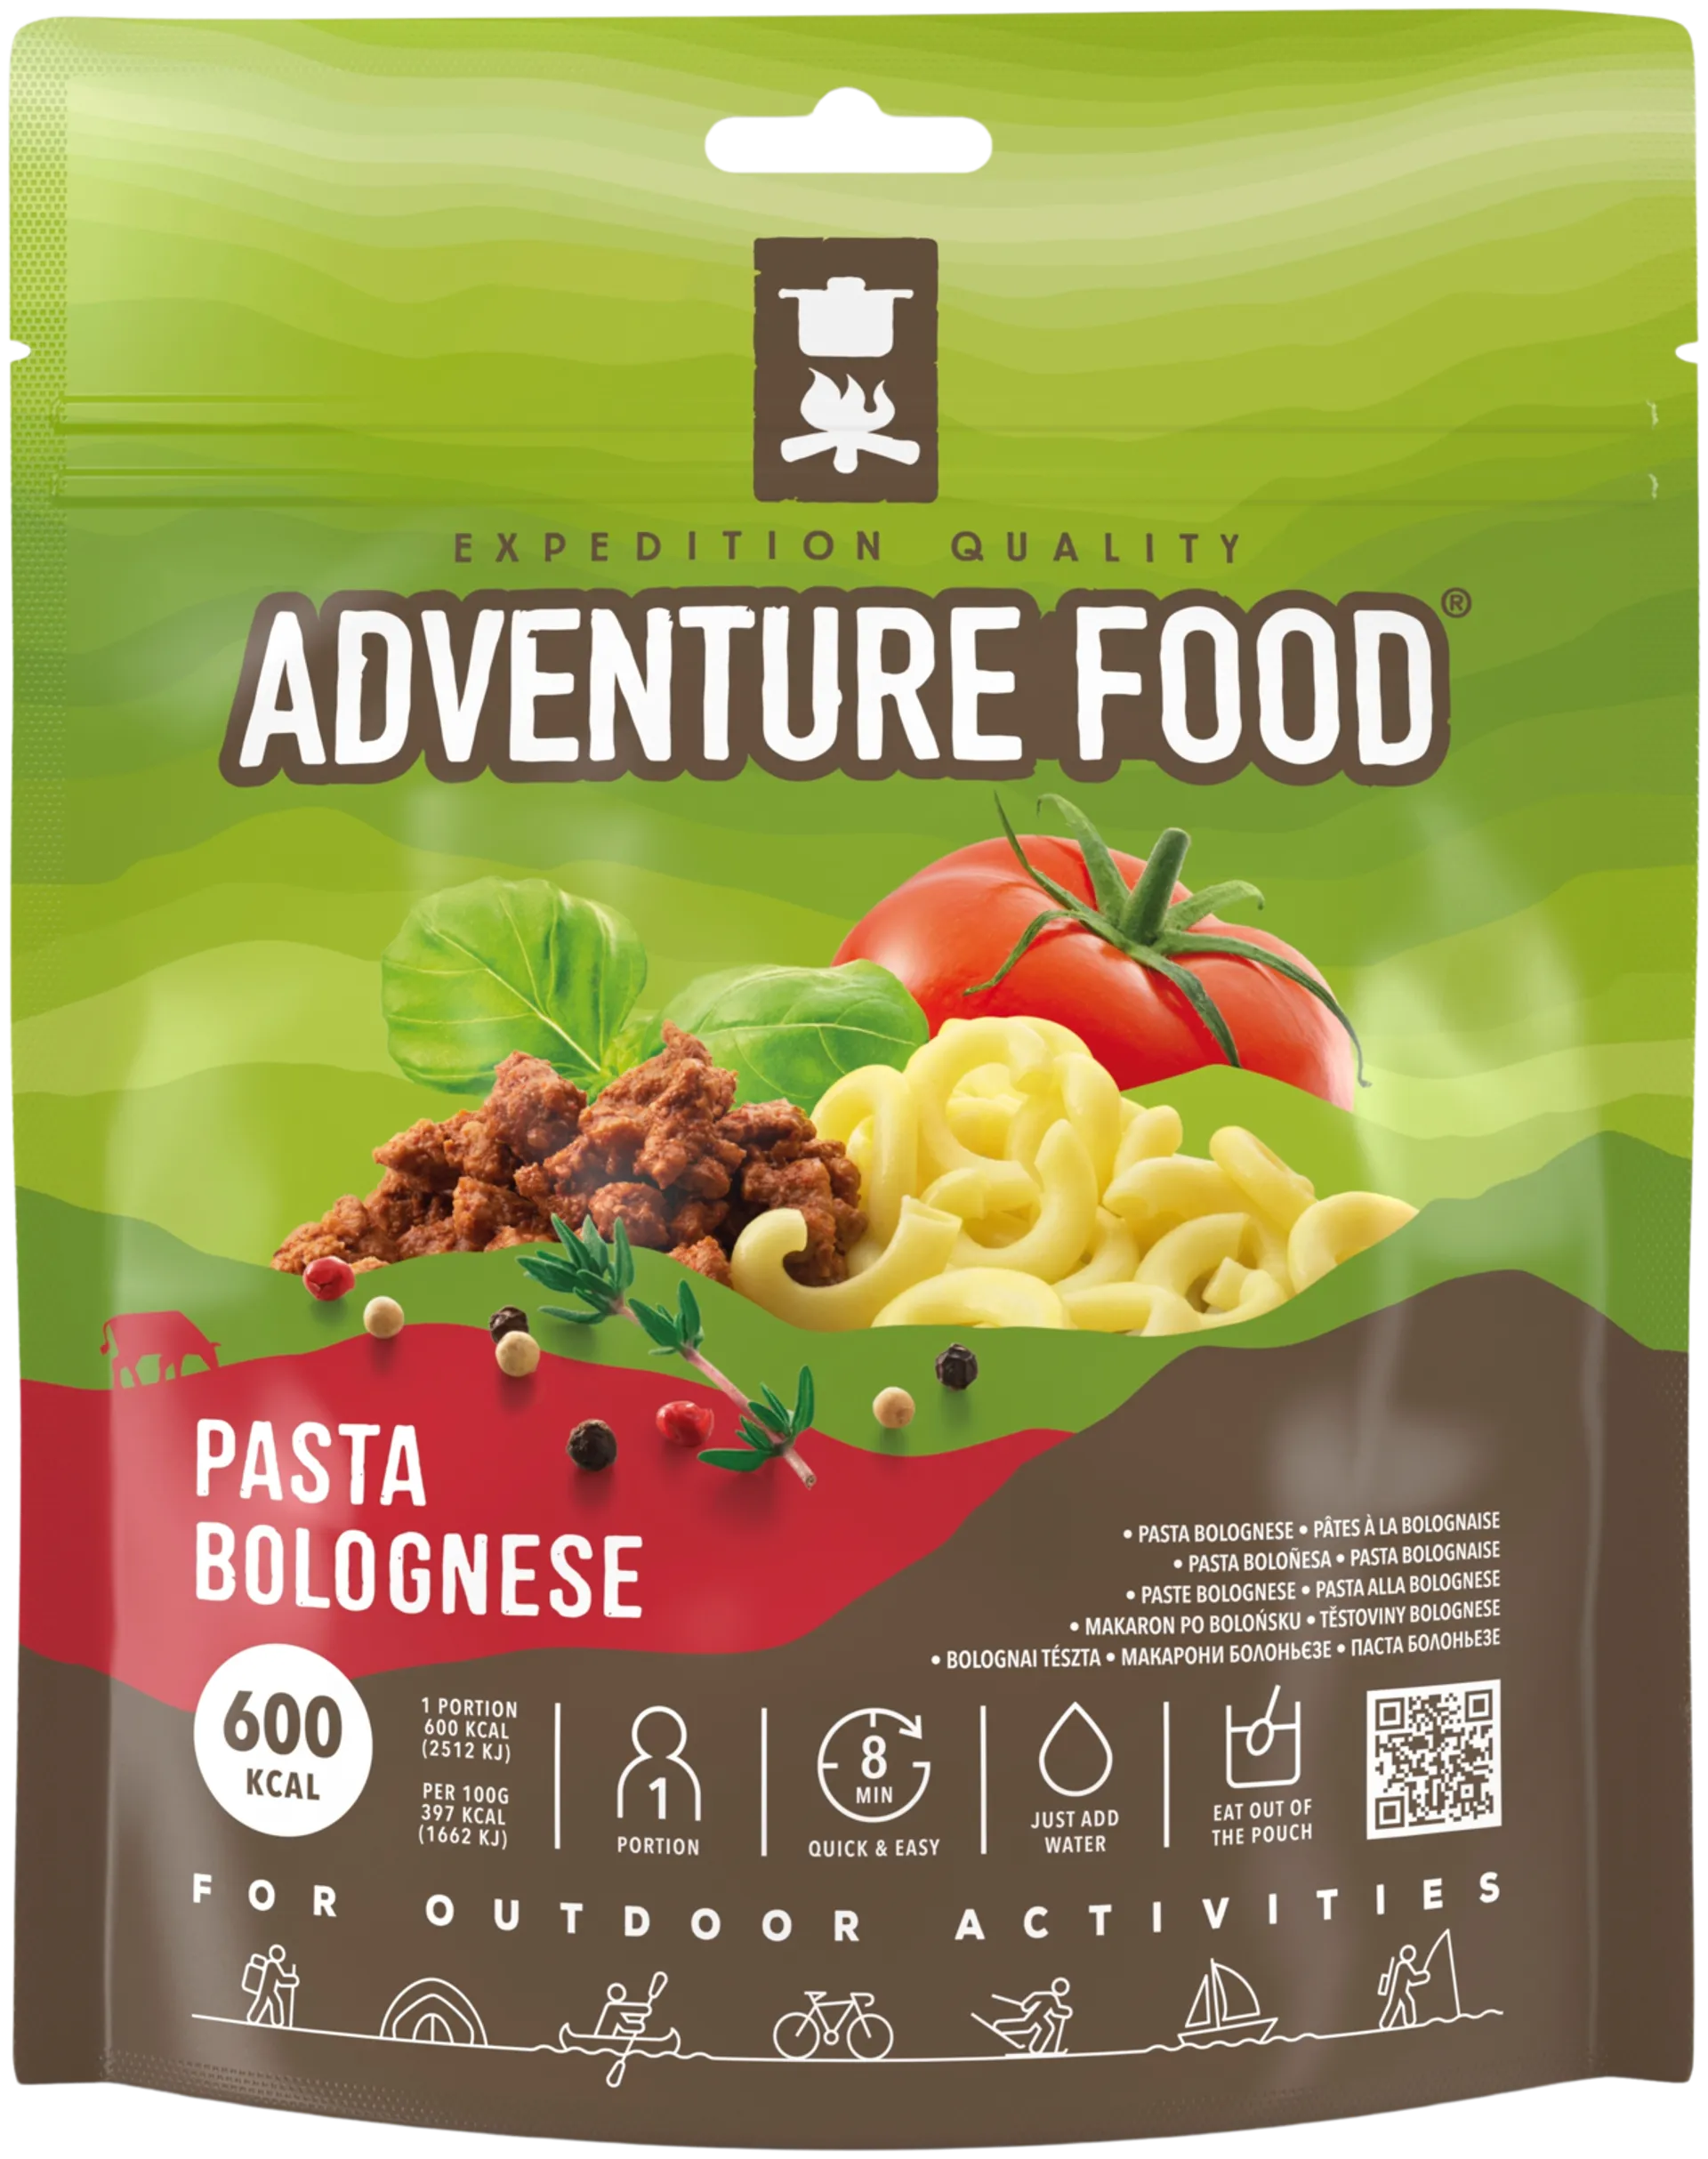 Adventure Food Pasta Bolognese, 600 kcal - 1